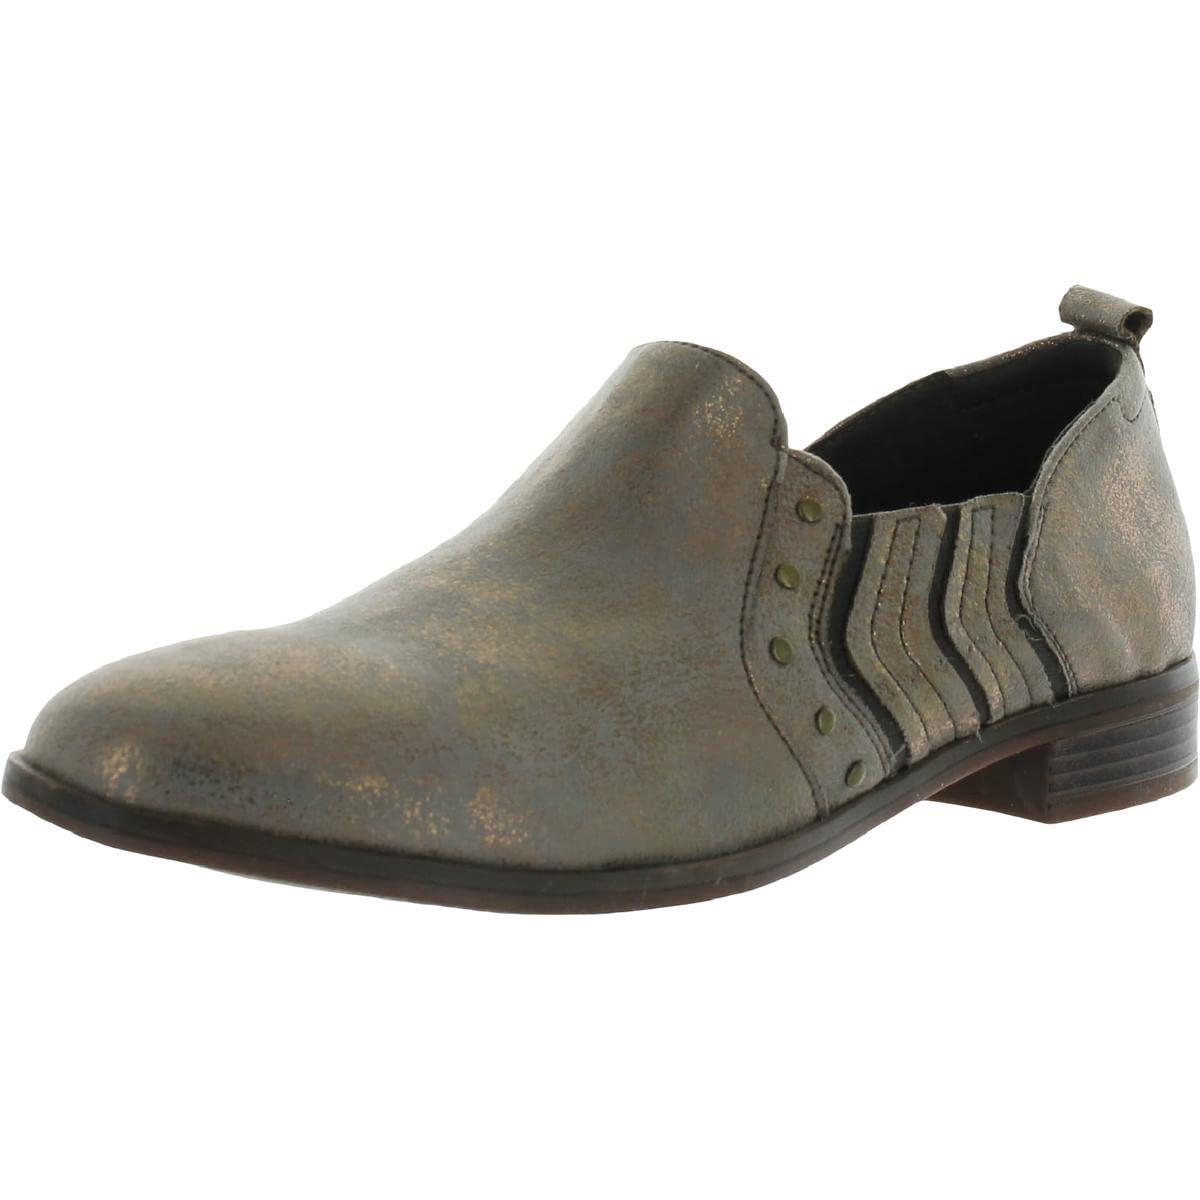 soborno Conquista Caducado Clarks S Trish Bell Suede Slip On Round-toe Shoes in Brown | Lyst UK